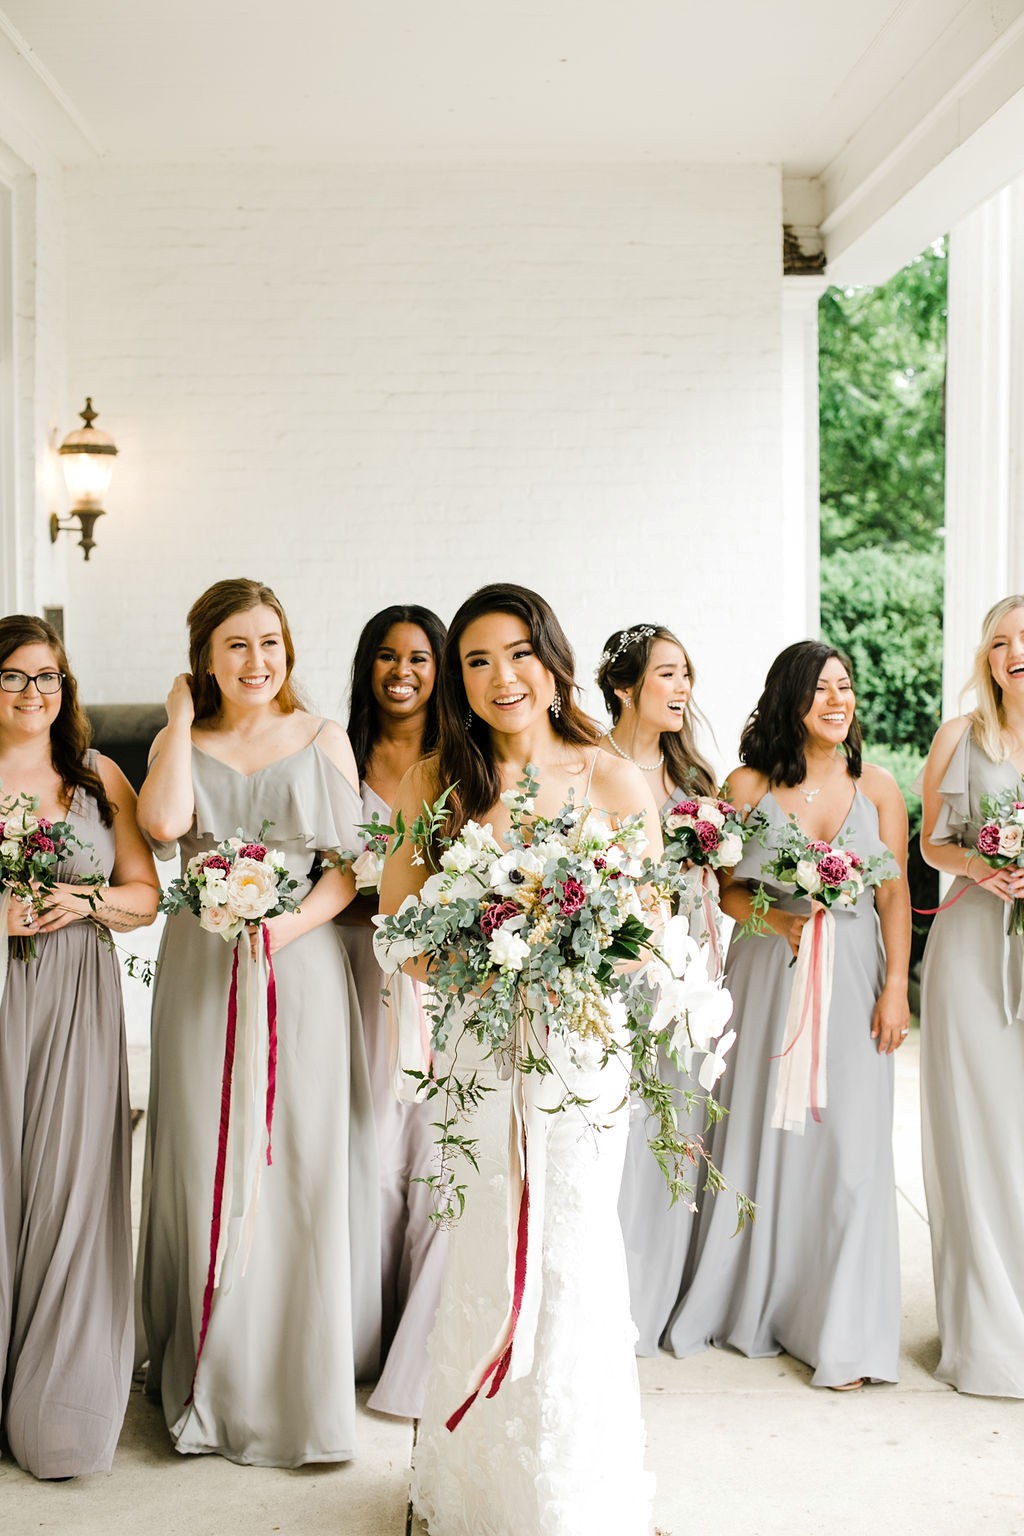 CJ's Off the Square | Bride and bridesmaids in white and grey gowns